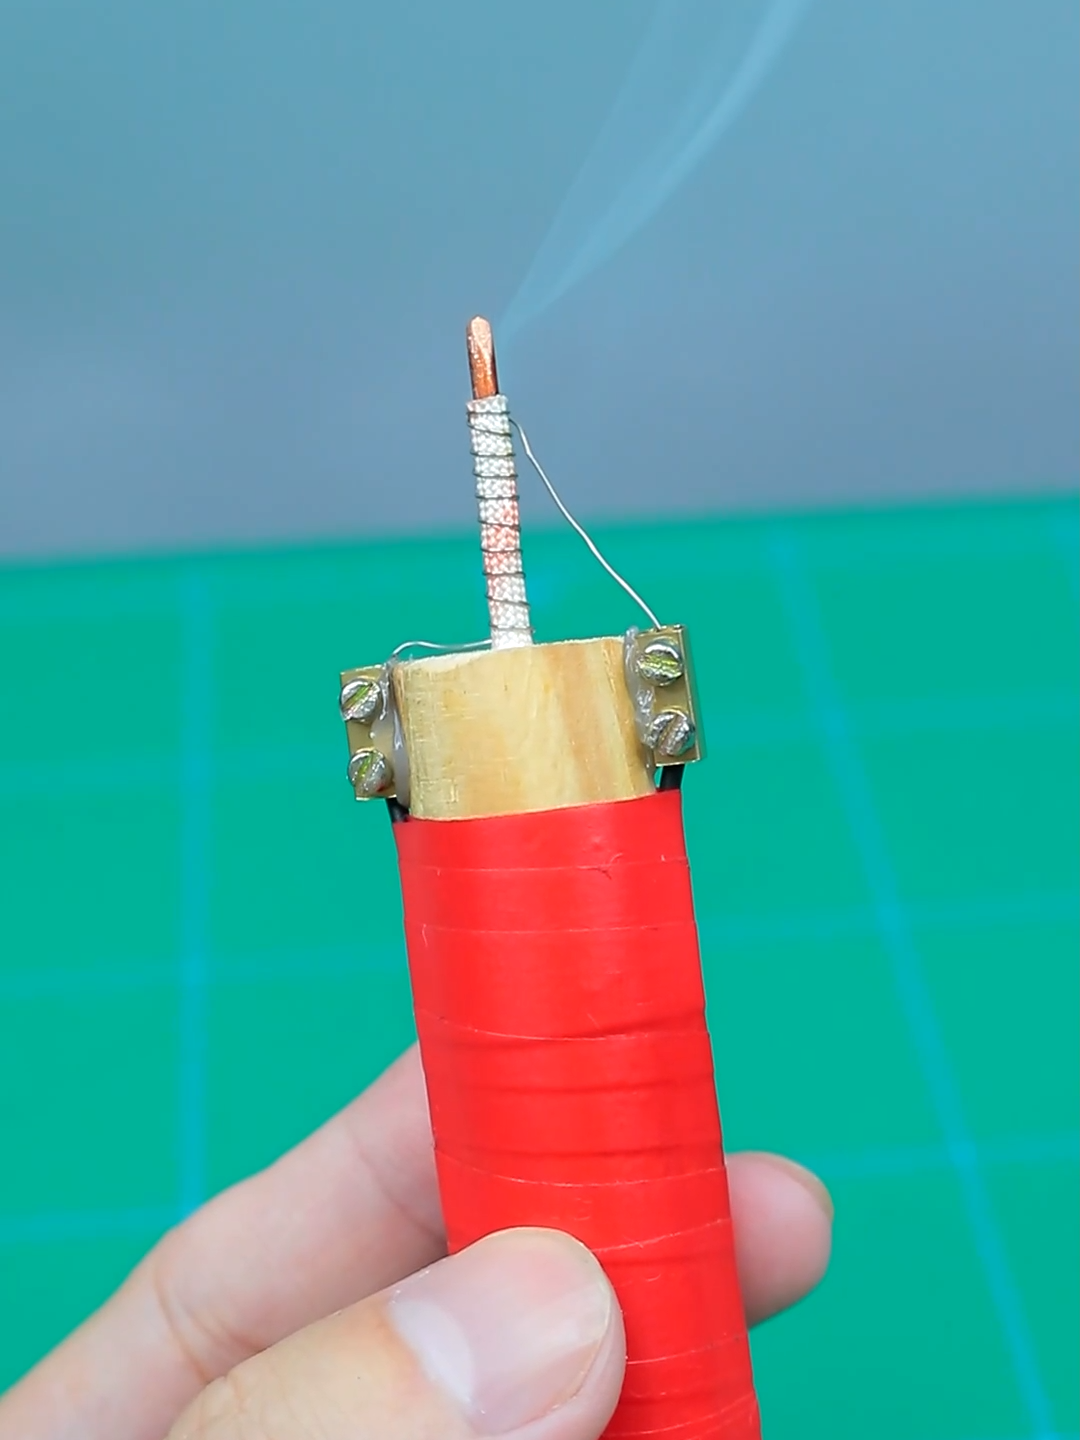 Awesome DIY soldering iron at home #DIY #ideas #tips #crafts #howtomake